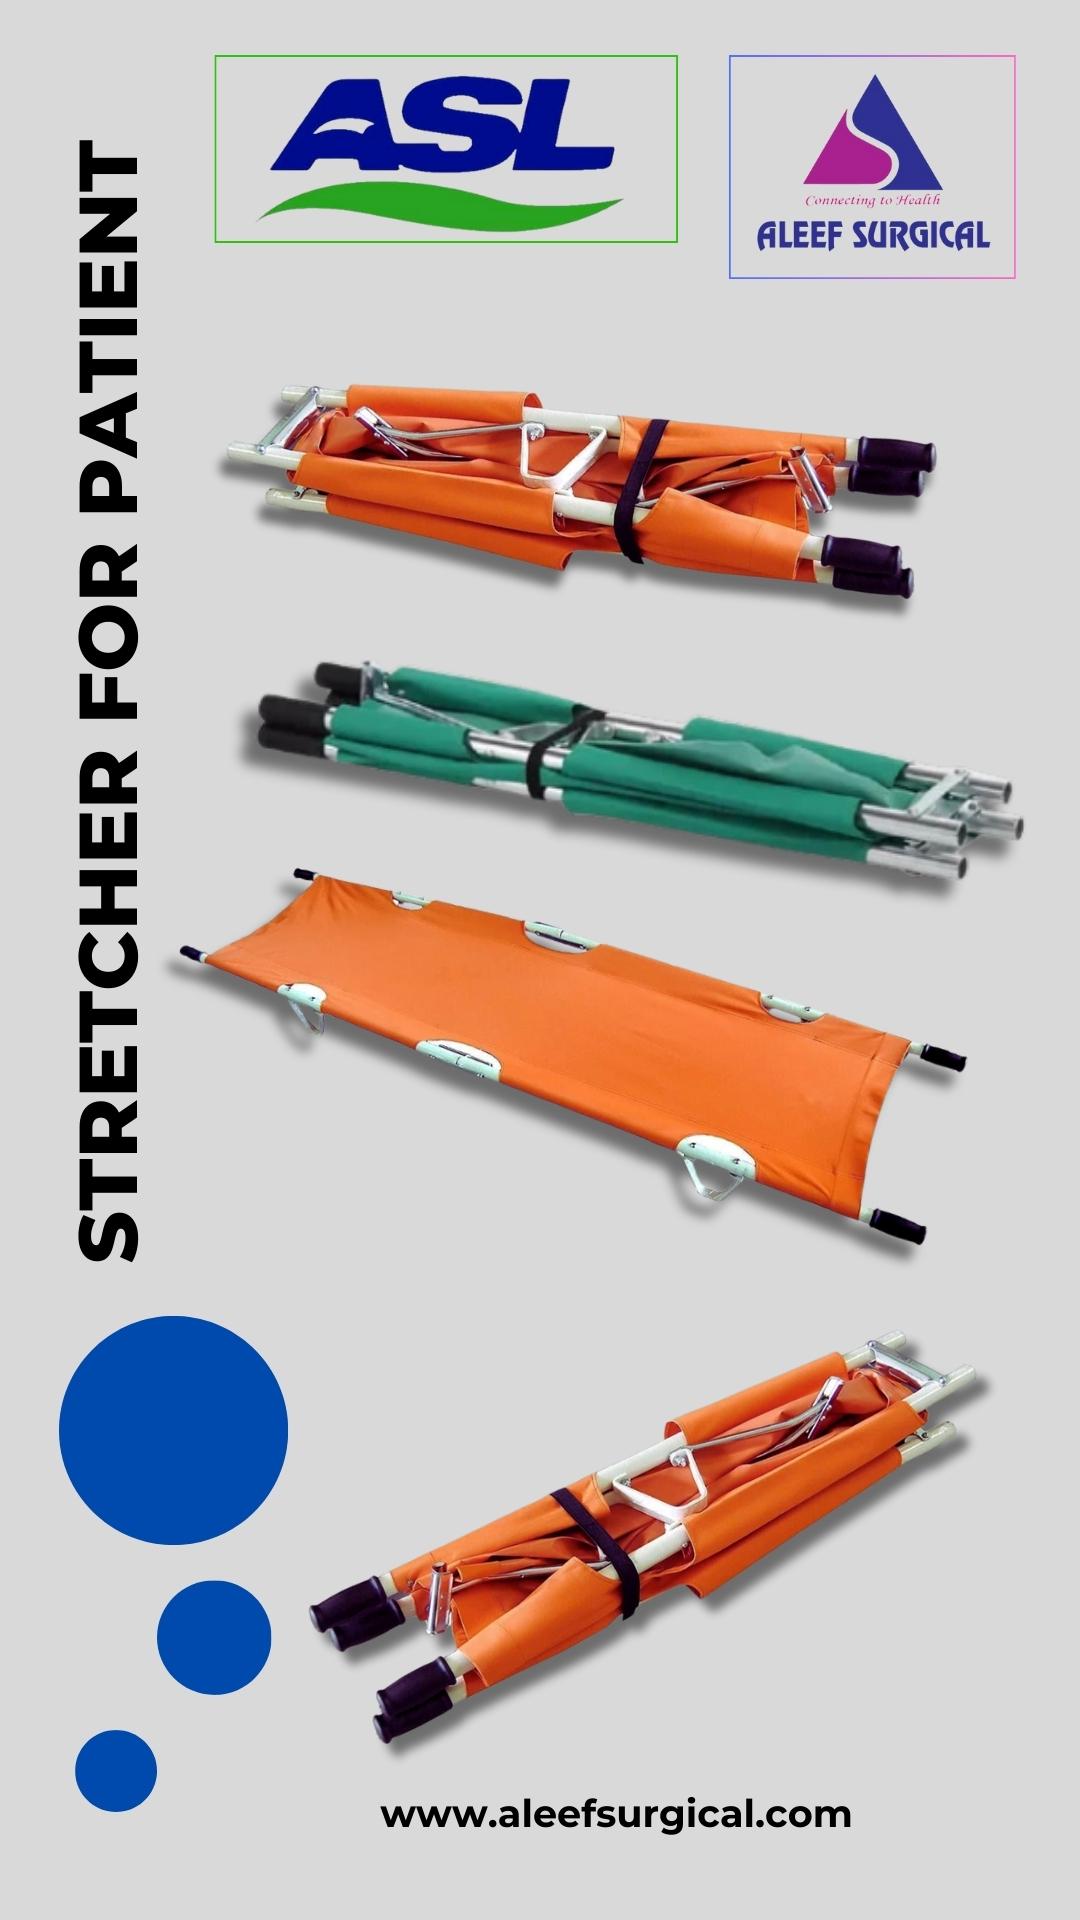 New Stretcher for Patient Best Price in BD. Image for New Stretcher